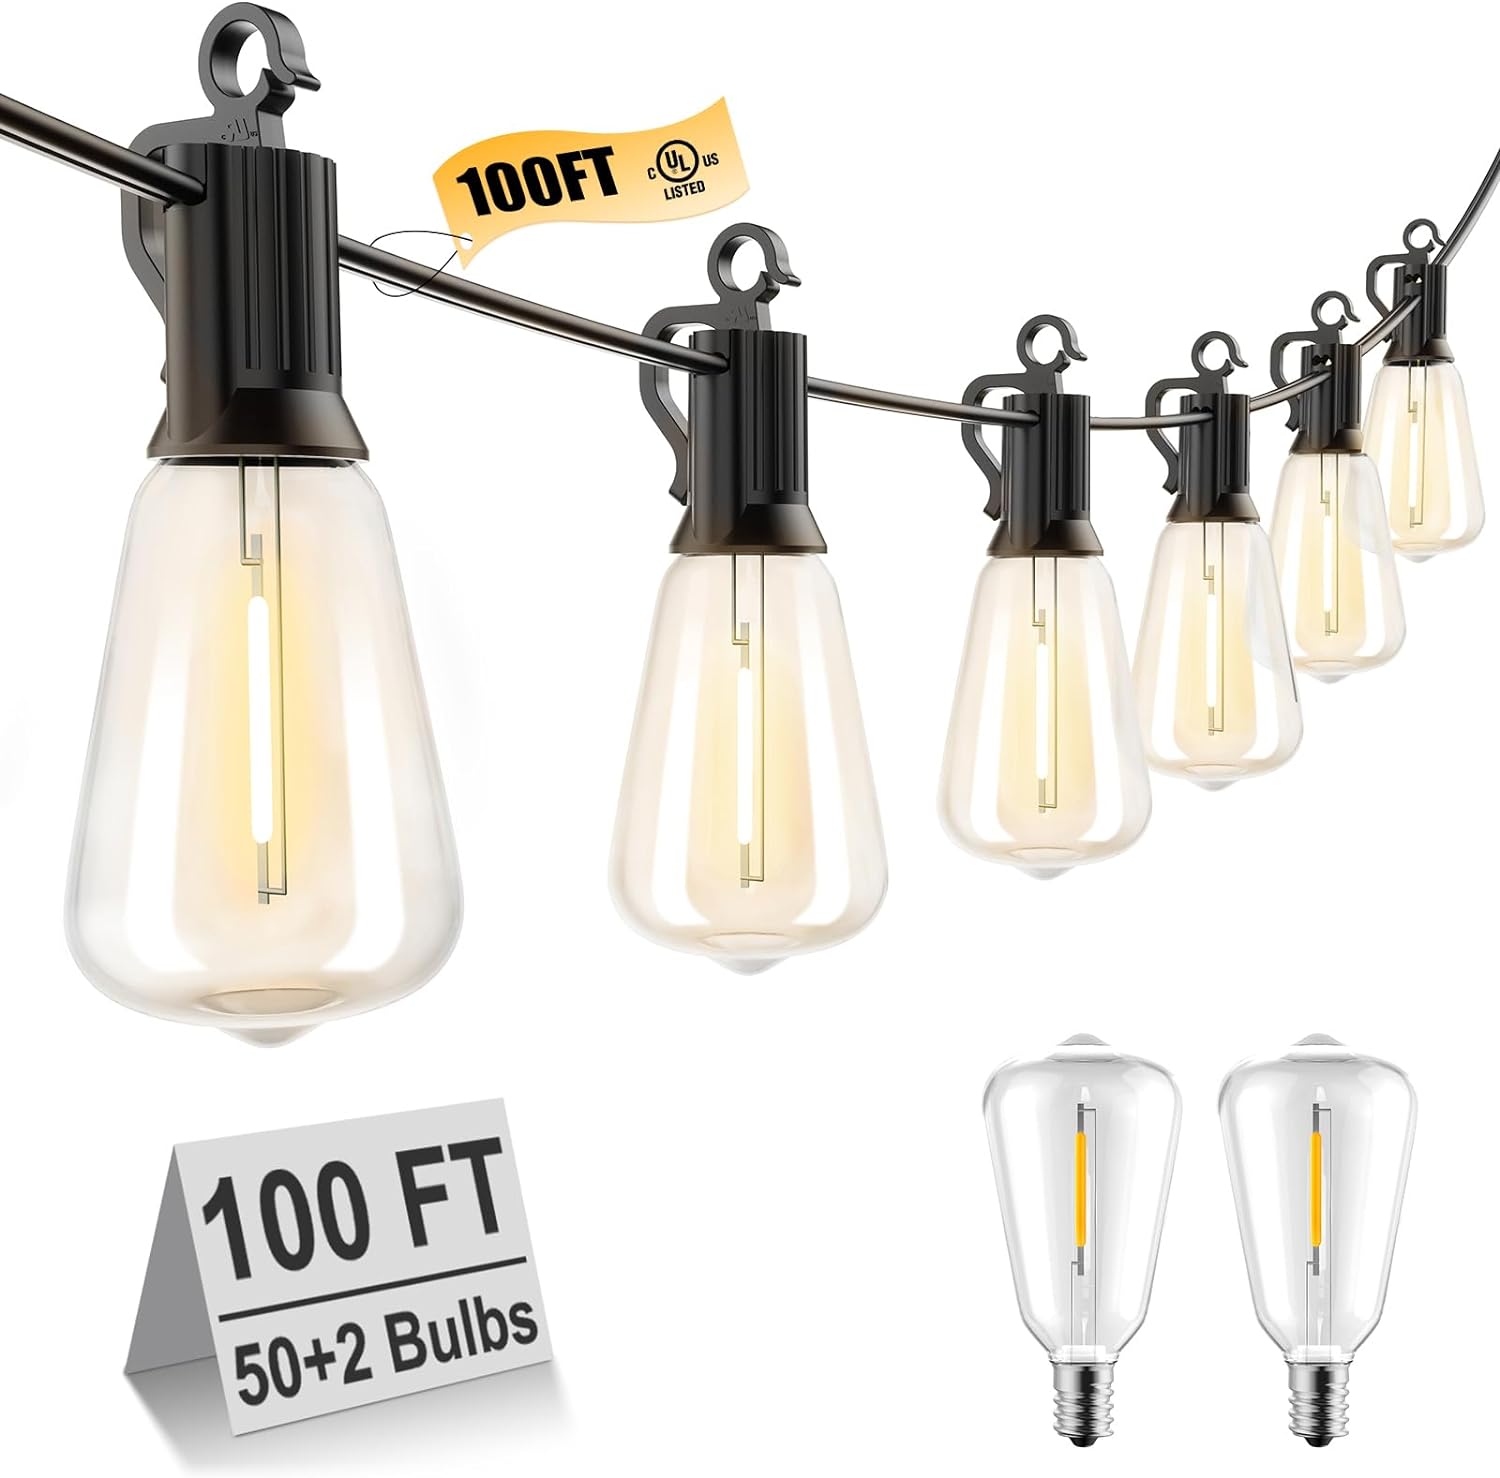 Brightown Outdoor String Lights LED 100FT Patio Lights with 52 Shatterproof ST38 Dimmable Vintage Edison Bulbs, Waterproof Outside Hanging Lights for Backyard Deck Garden Party Xmas Decor, 2700K